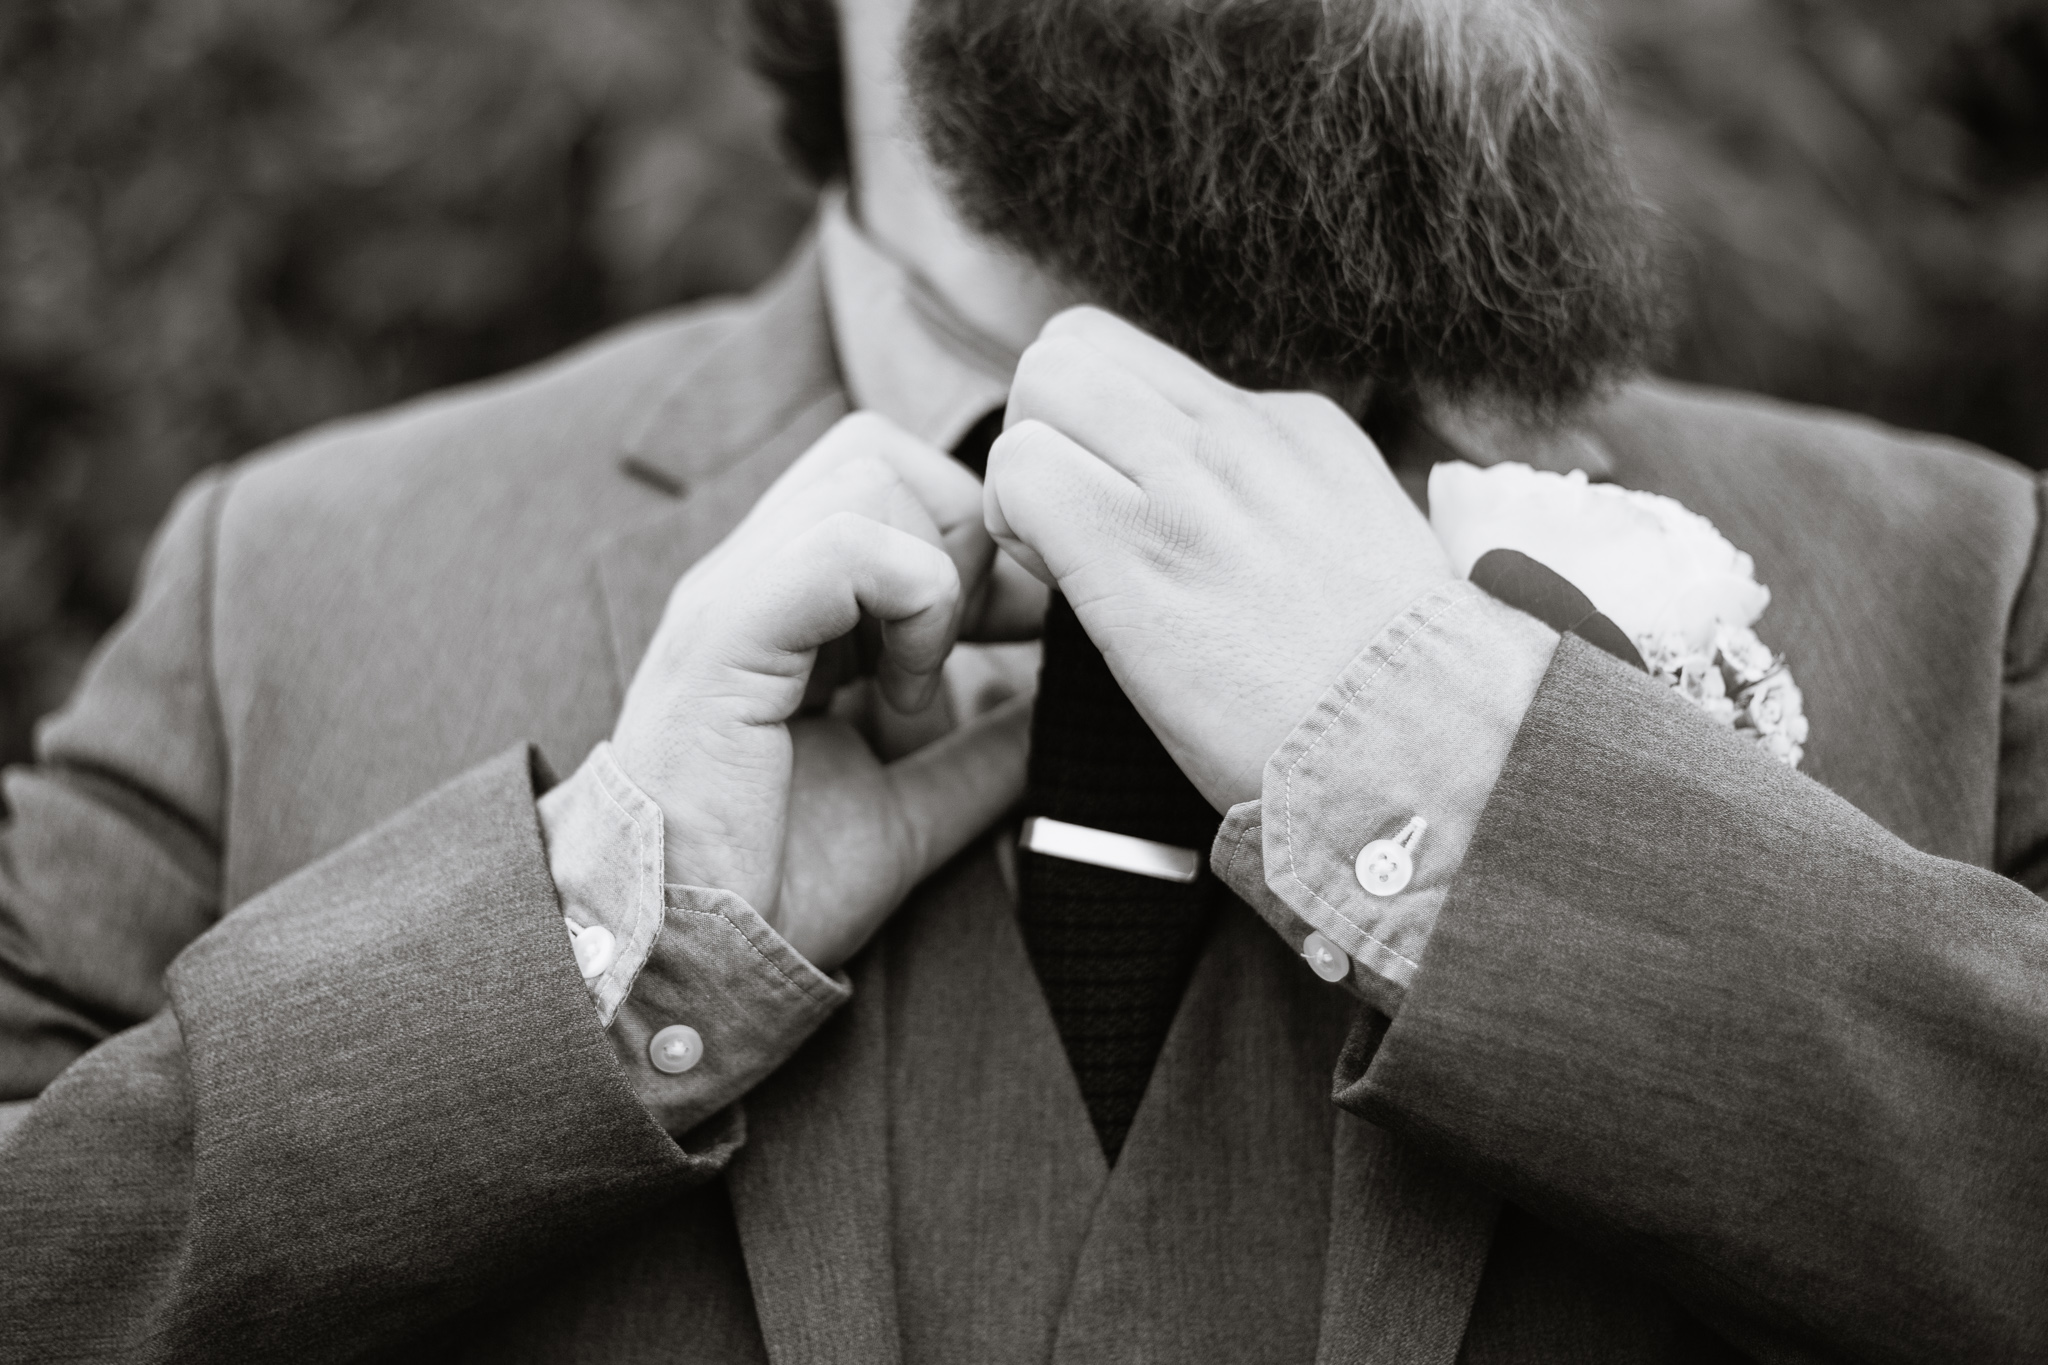 Black and white image of a groom adjusting his tie while getting ready for his wedding day.